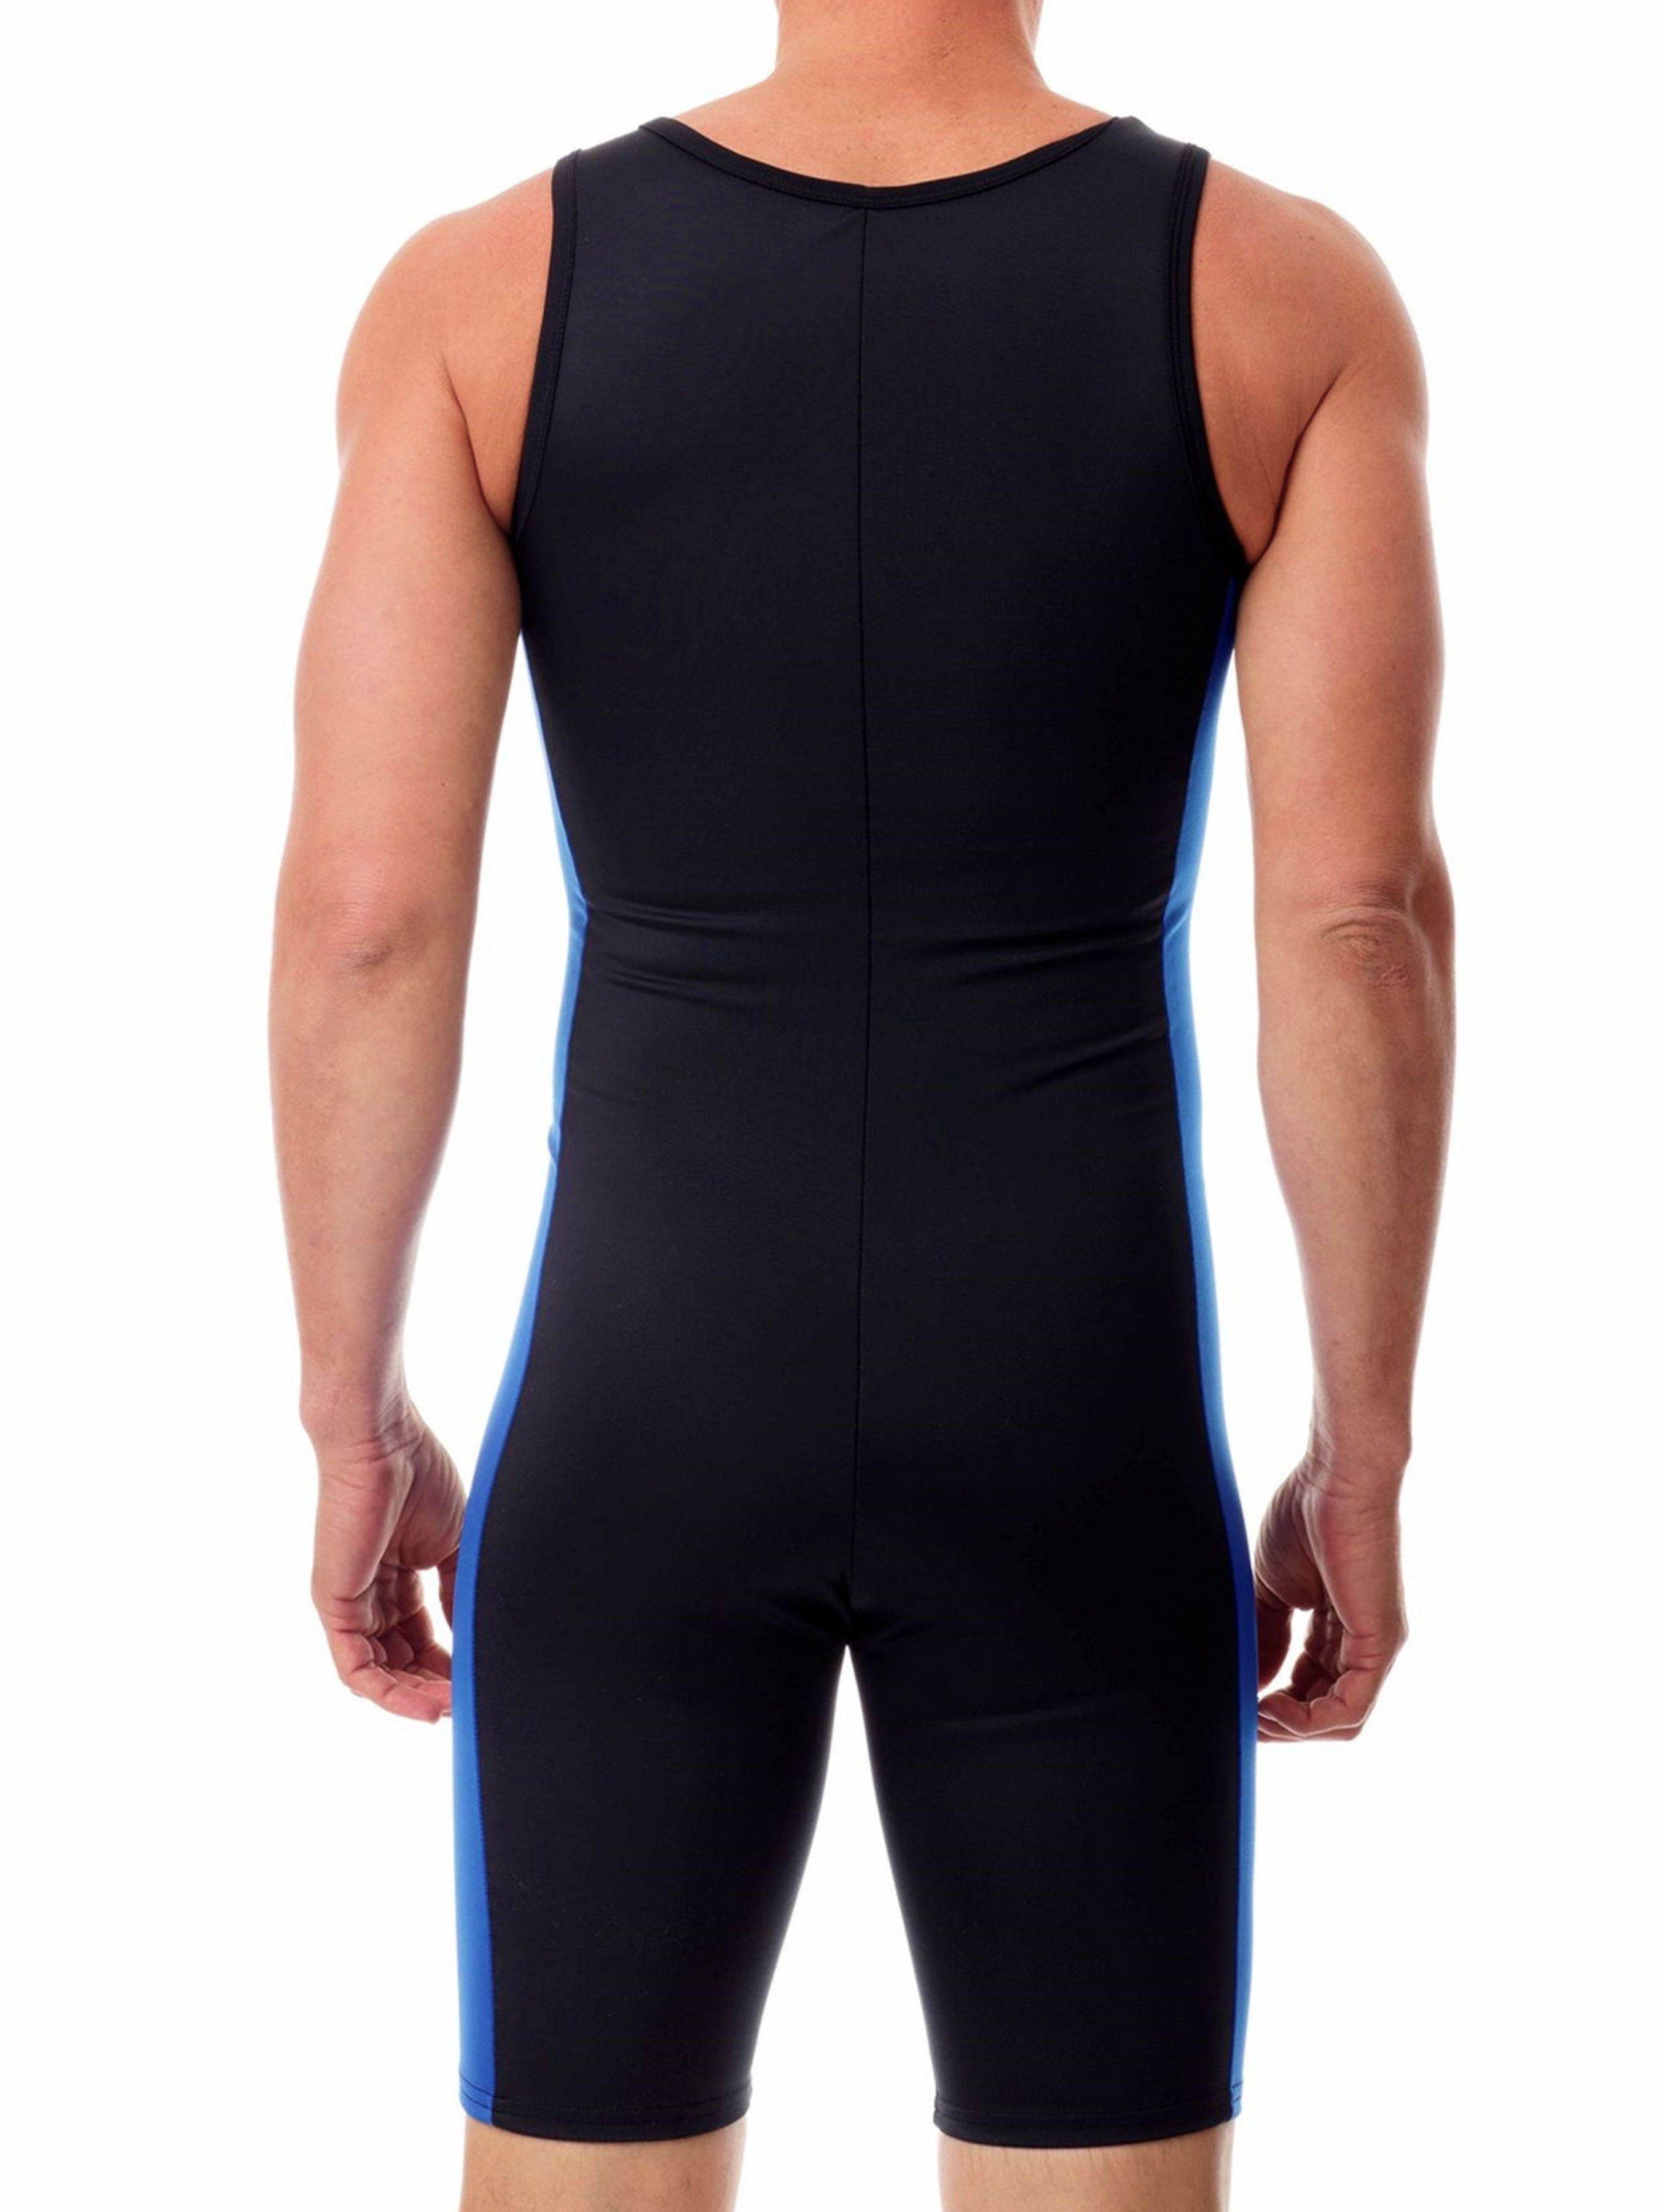 NEW! Compression Swimsuit.